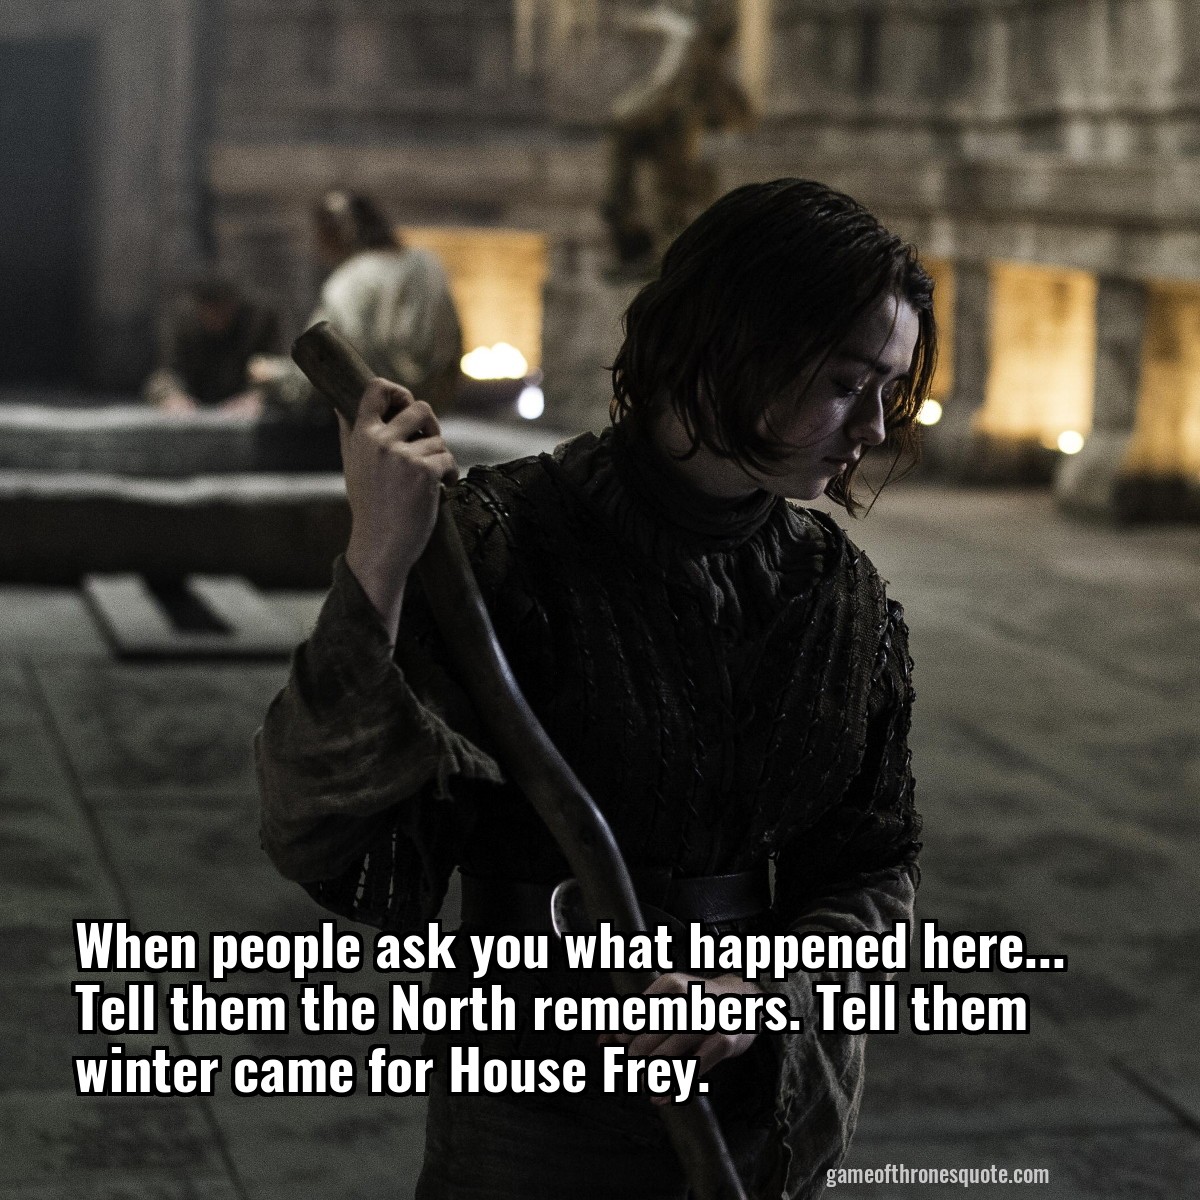 When people ask you what happened here... Tell them the North remembers. Tell them winter came for House Frey.